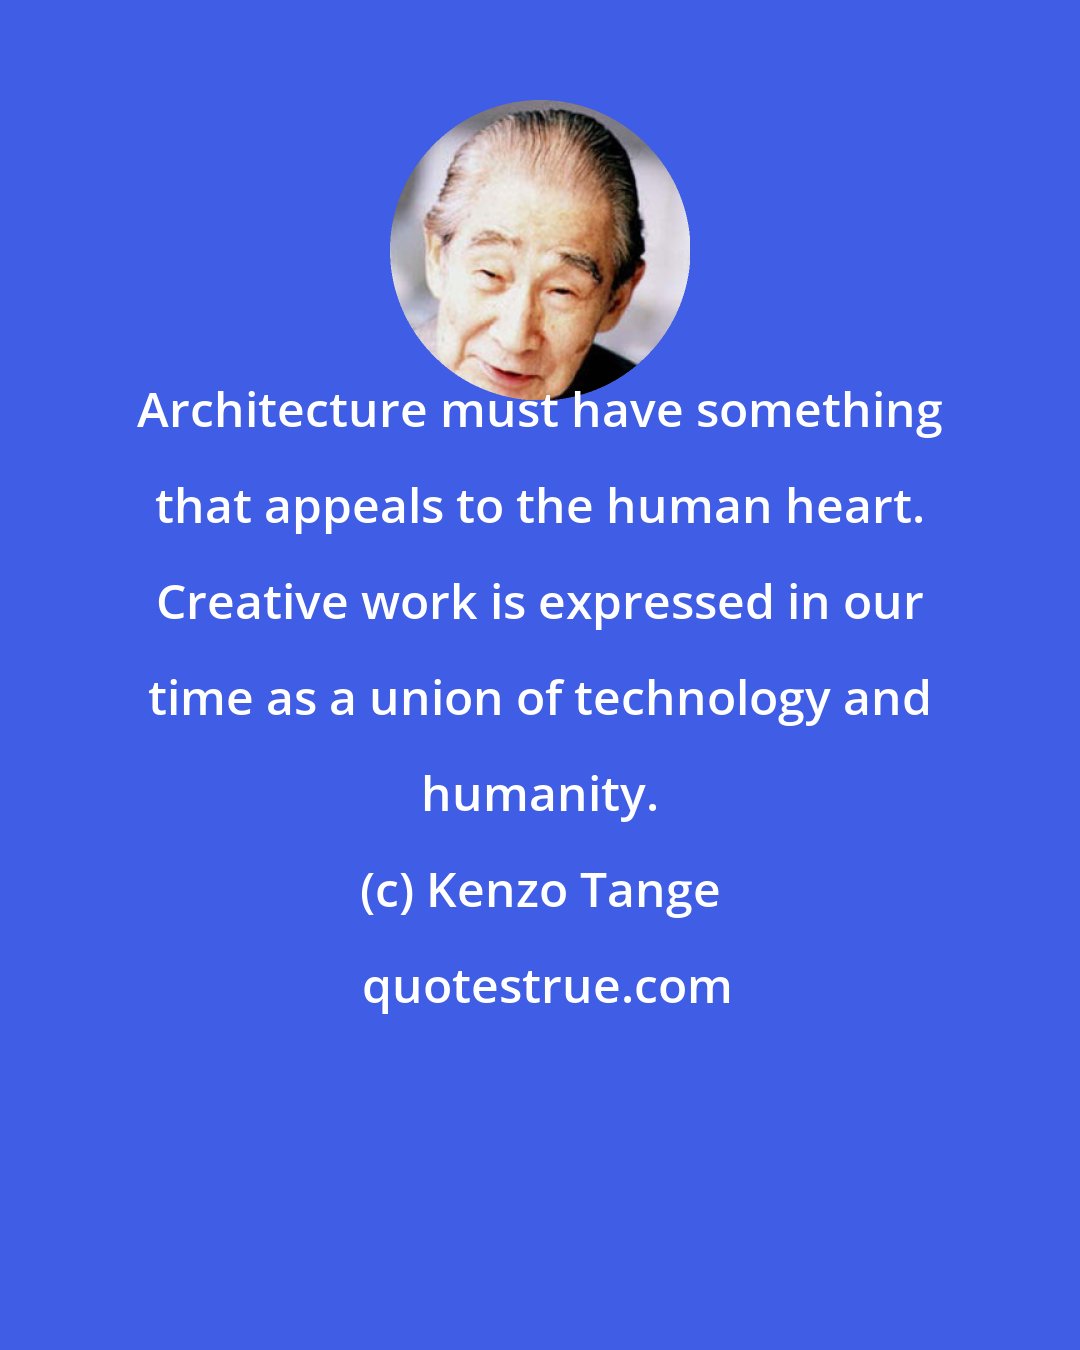 Kenzo Tange: Architecture must have something that appeals to the human heart. Creative work is expressed in our time as a union of technology and humanity.